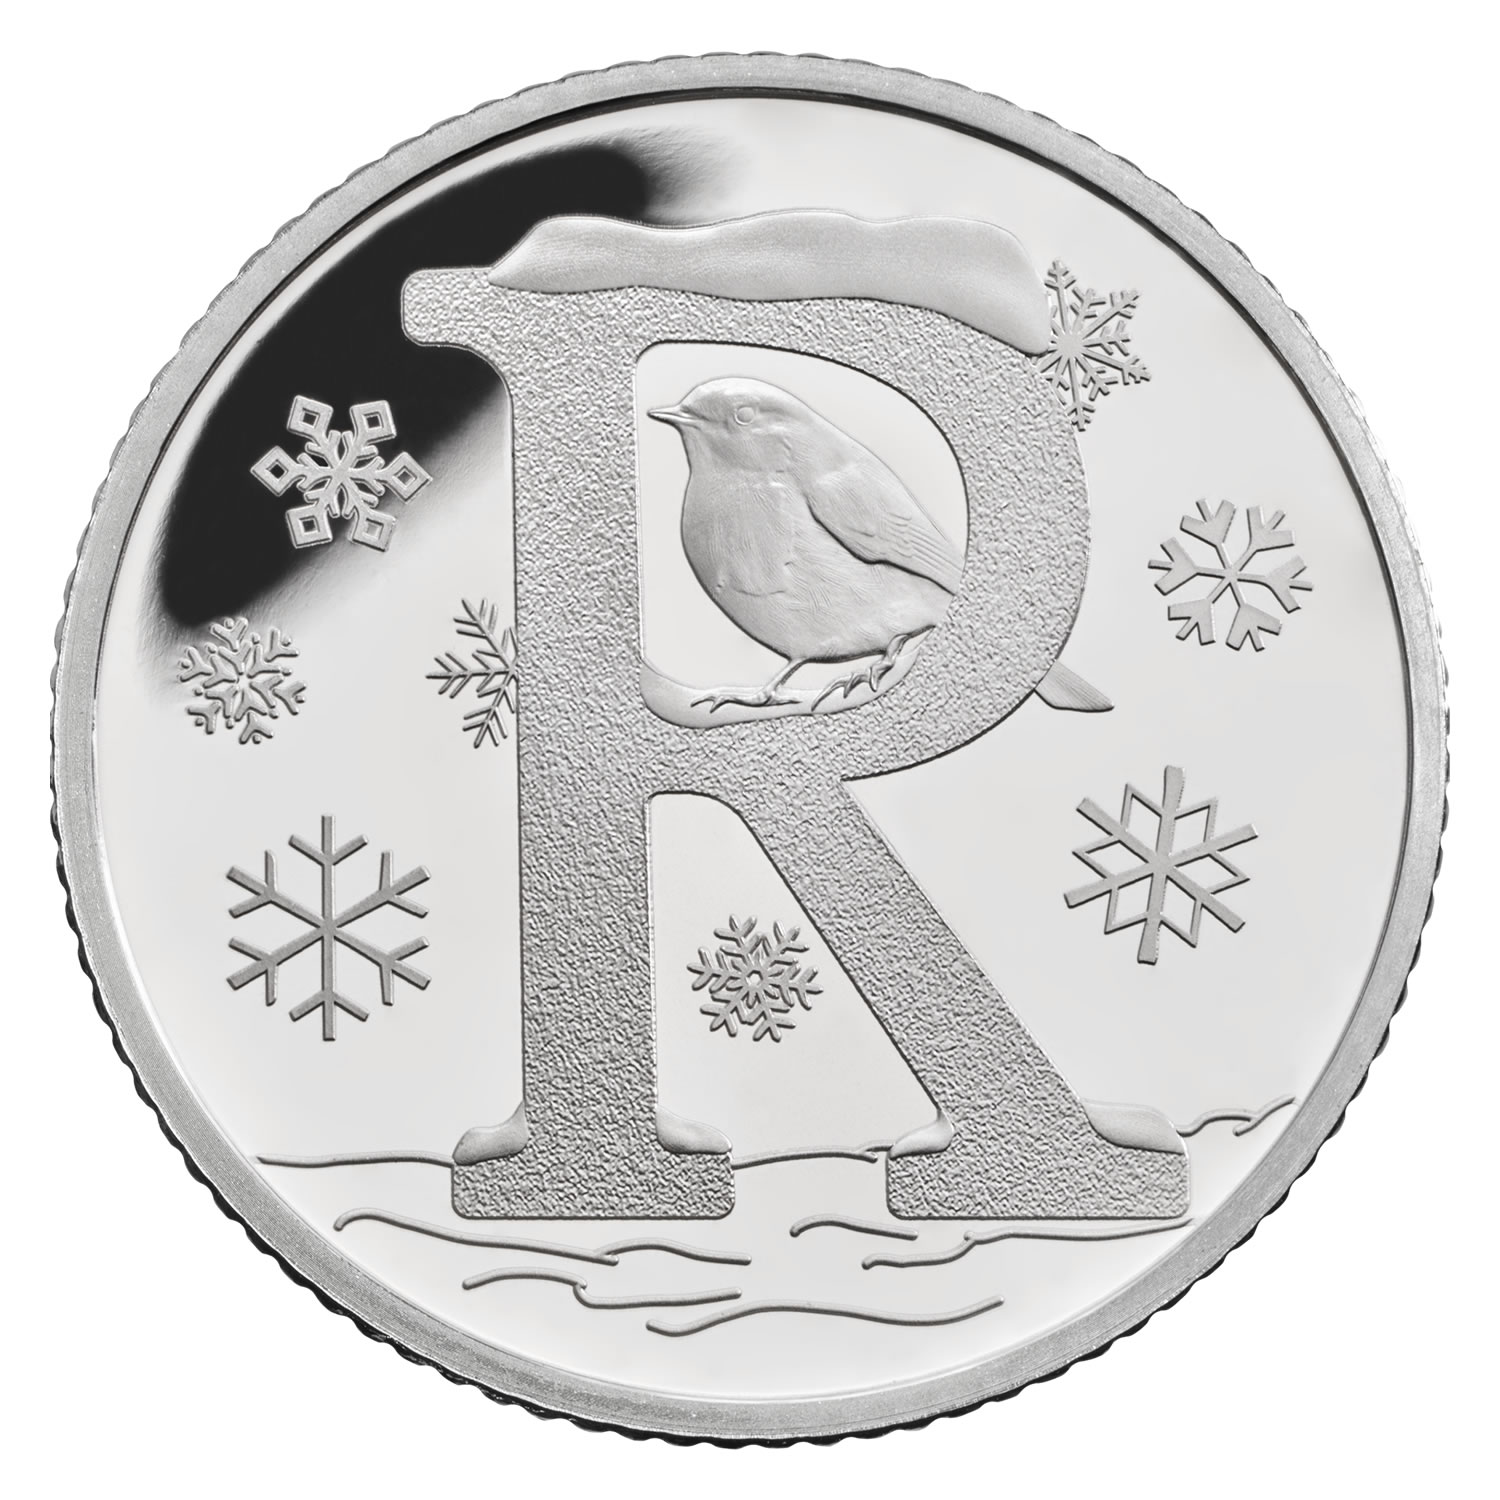 30% off GBCH Silver Proof Coins | The Royal Mint